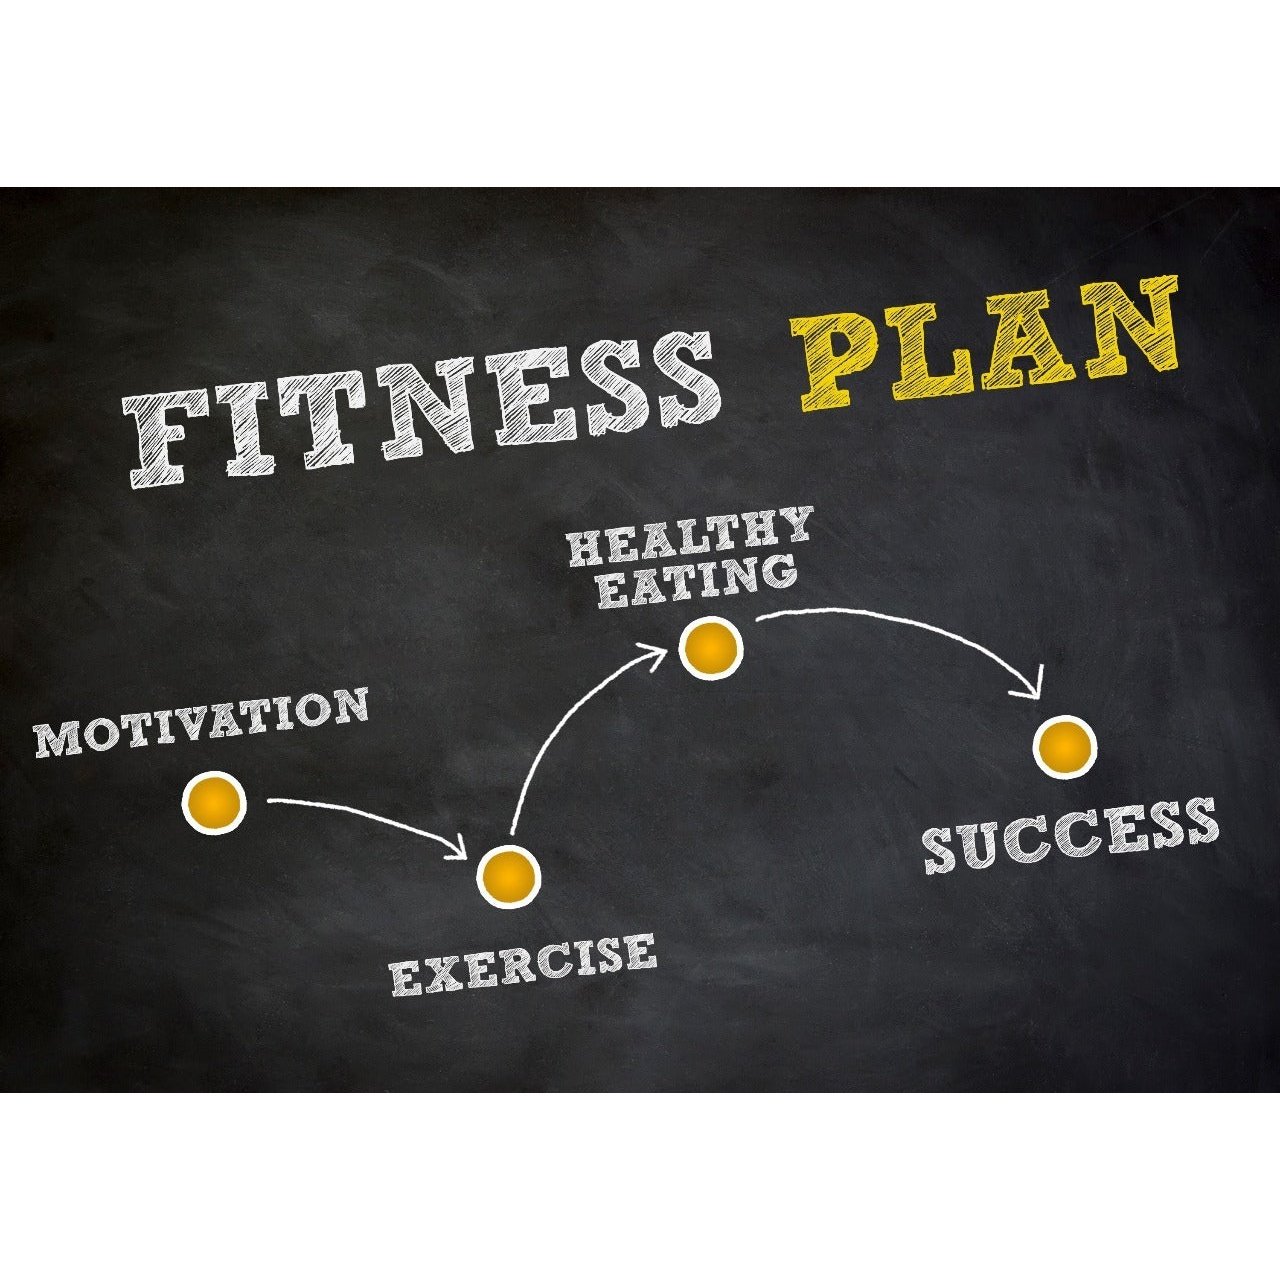 The Exciting First Phase of the Fitness Journey: Understanding the Benefits and Changes